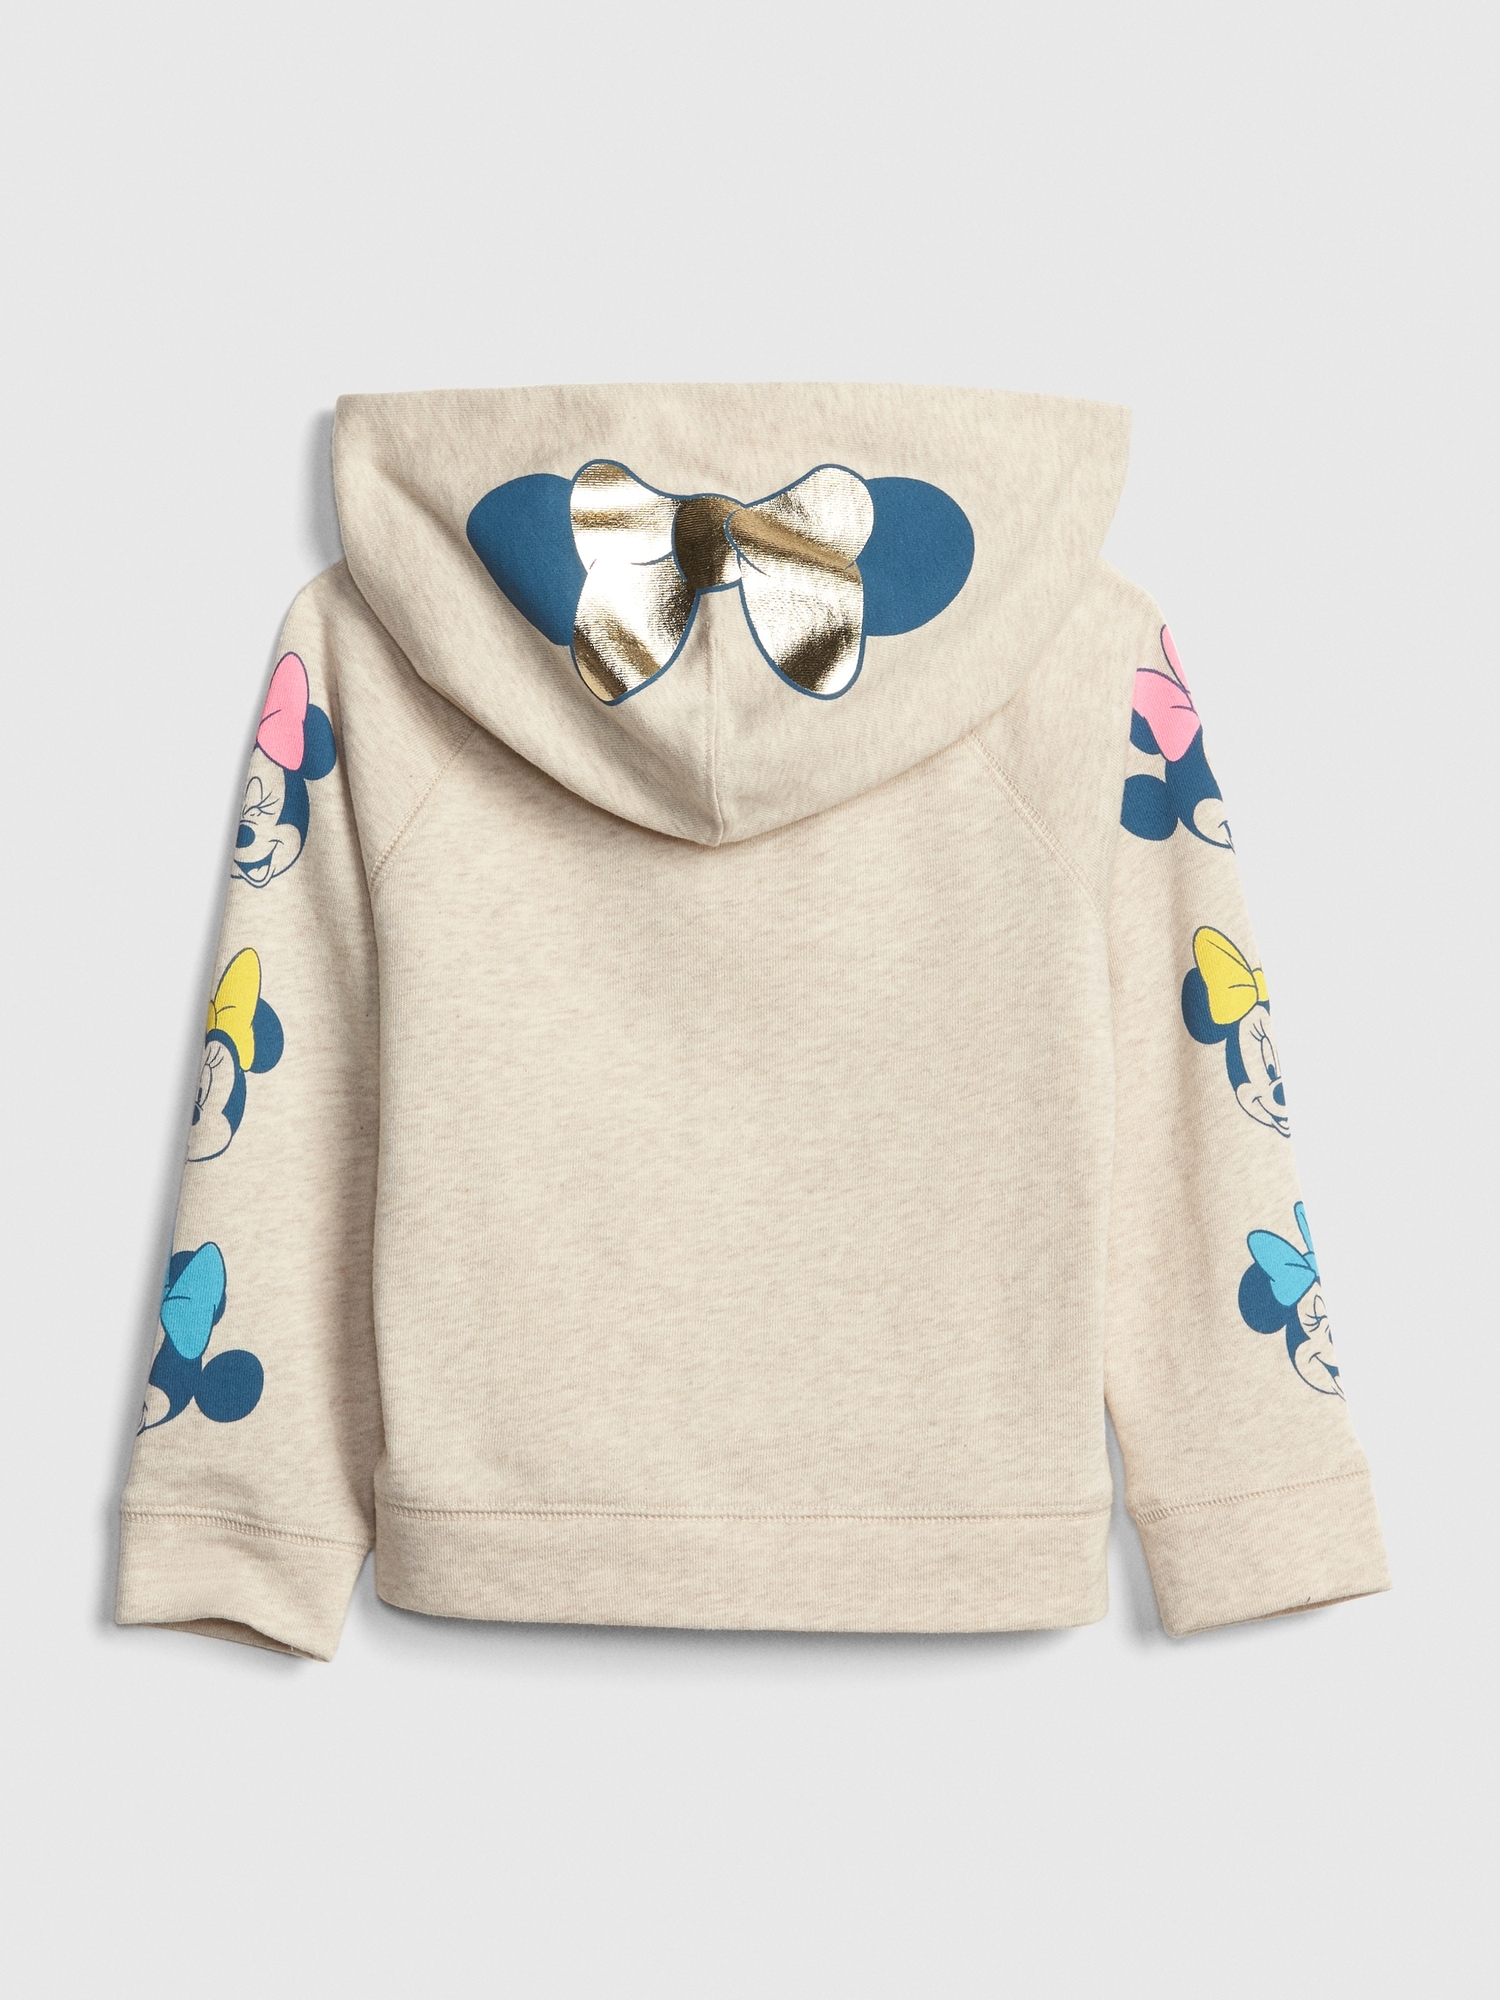 Toddler Girls' Minnie Mouse Hooded Zip-up Sweatshirt - Oatmeal